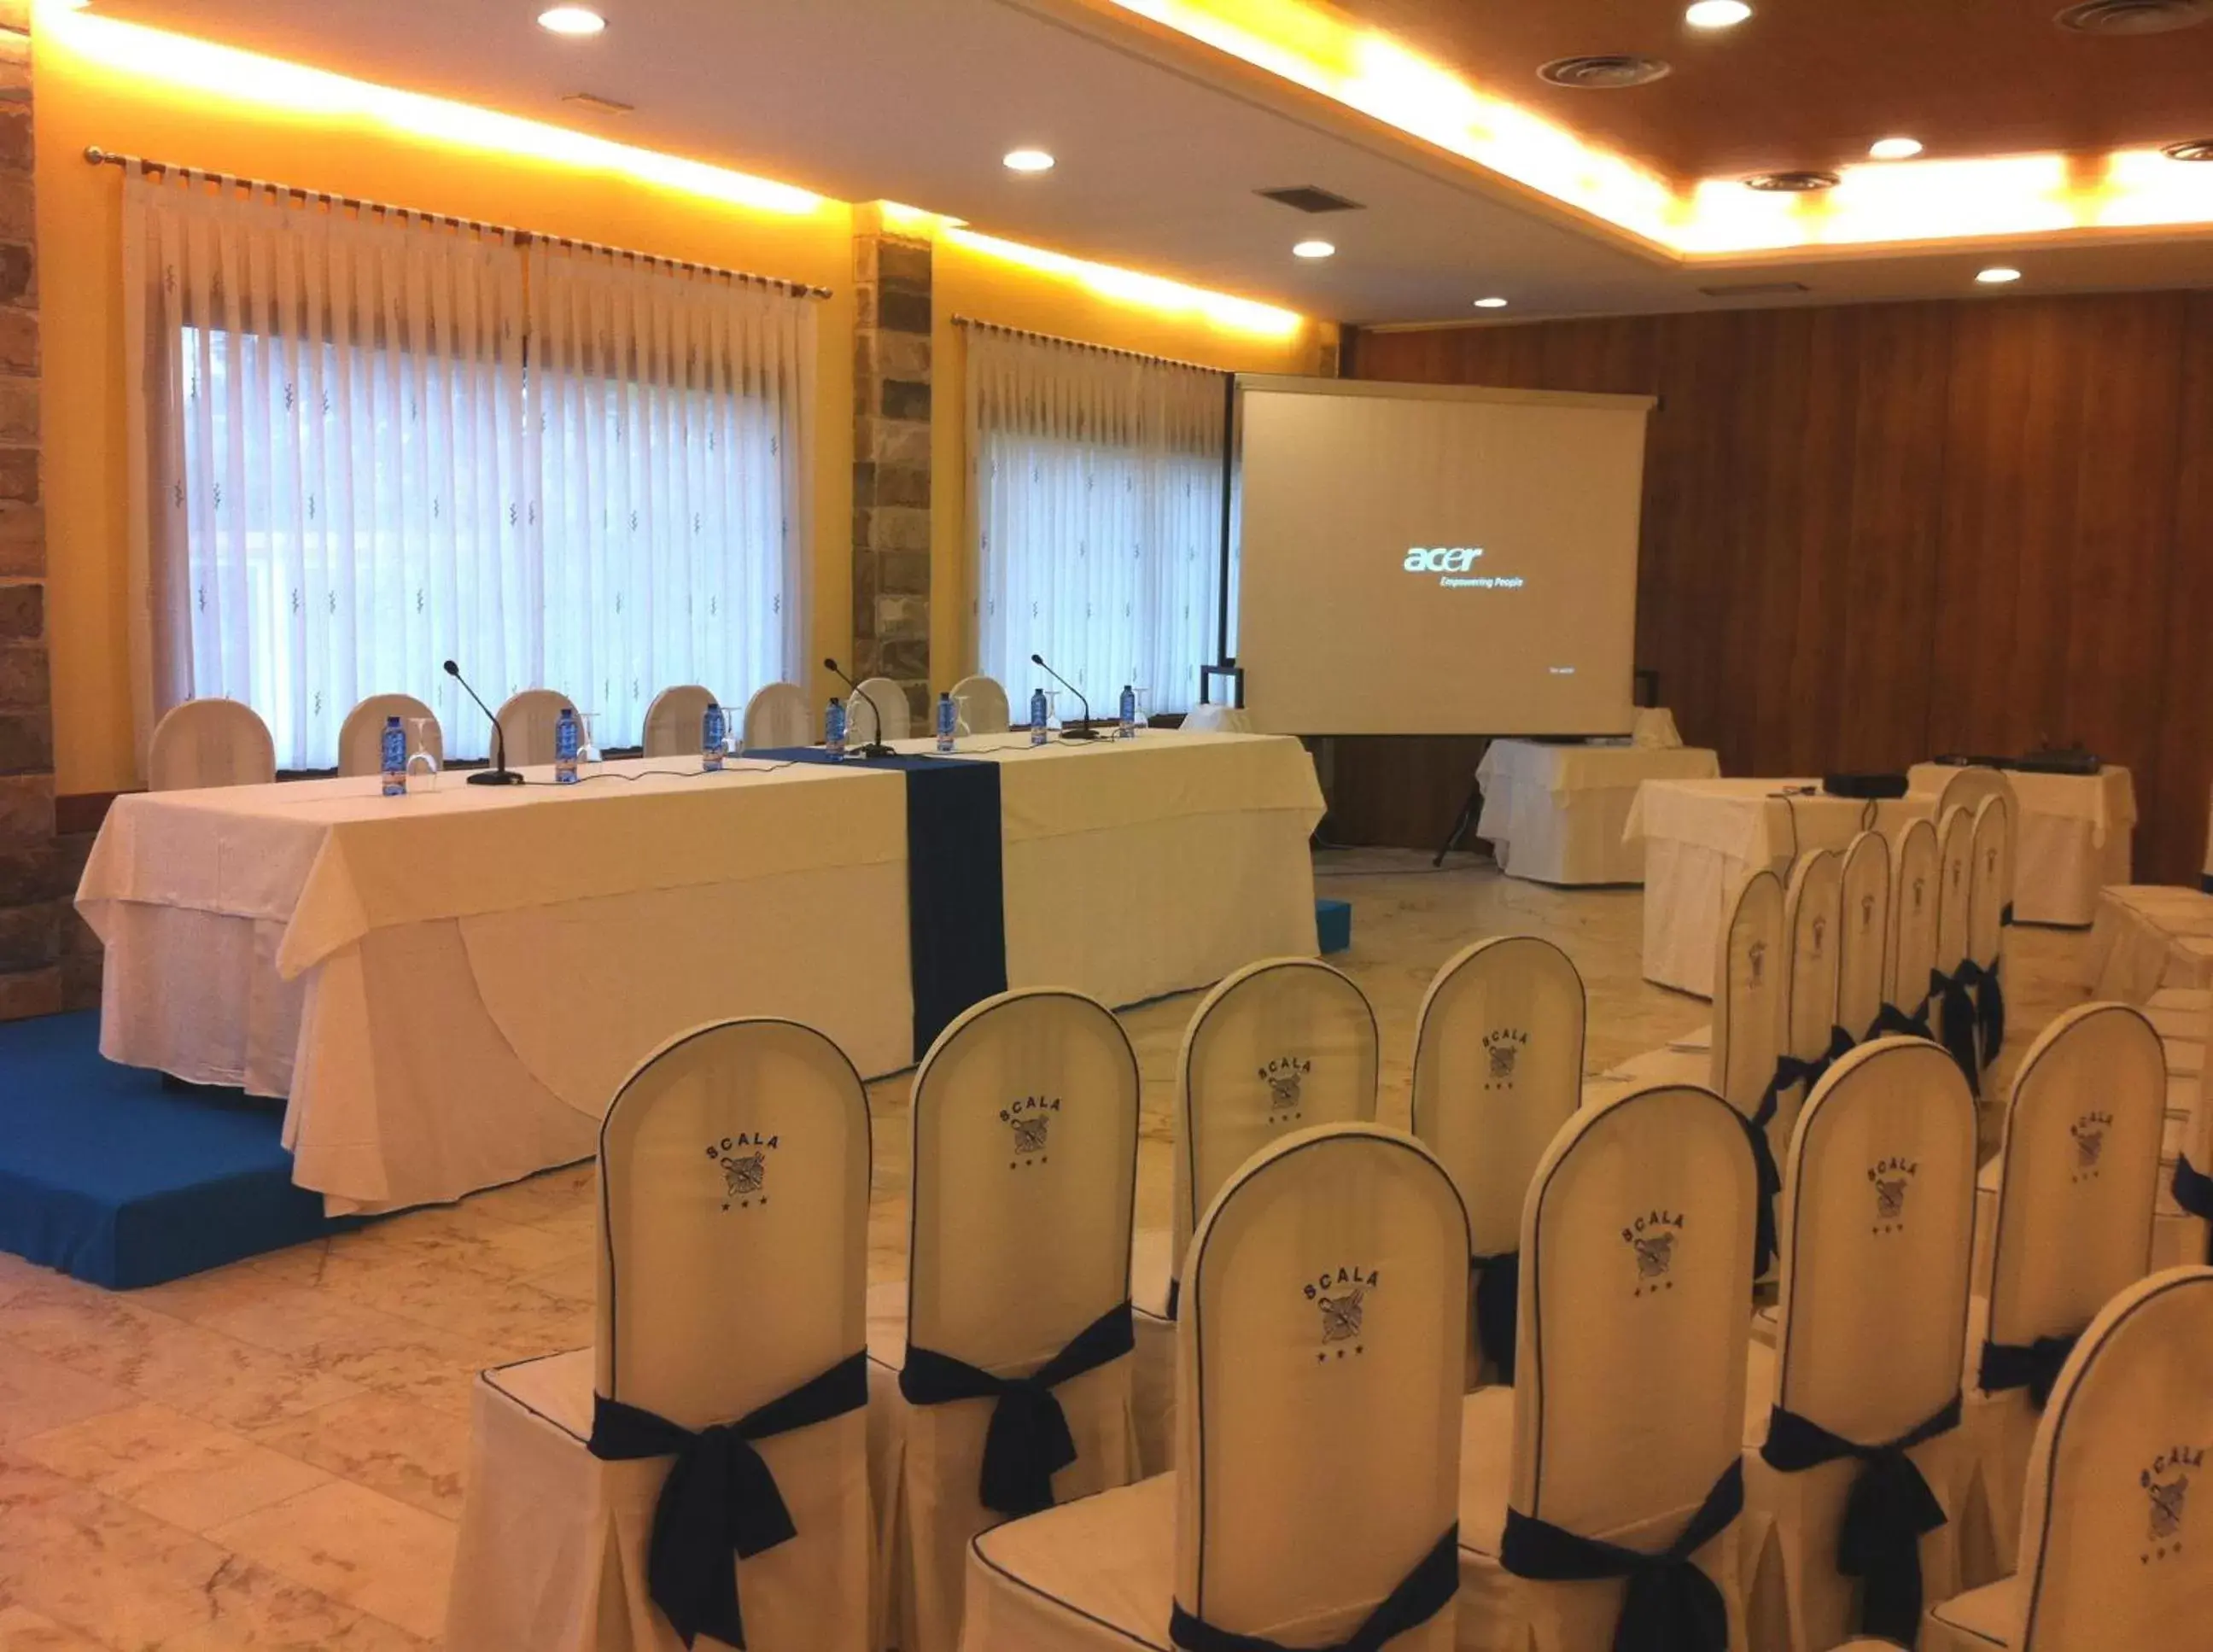 Business facilities in Hotel Scala